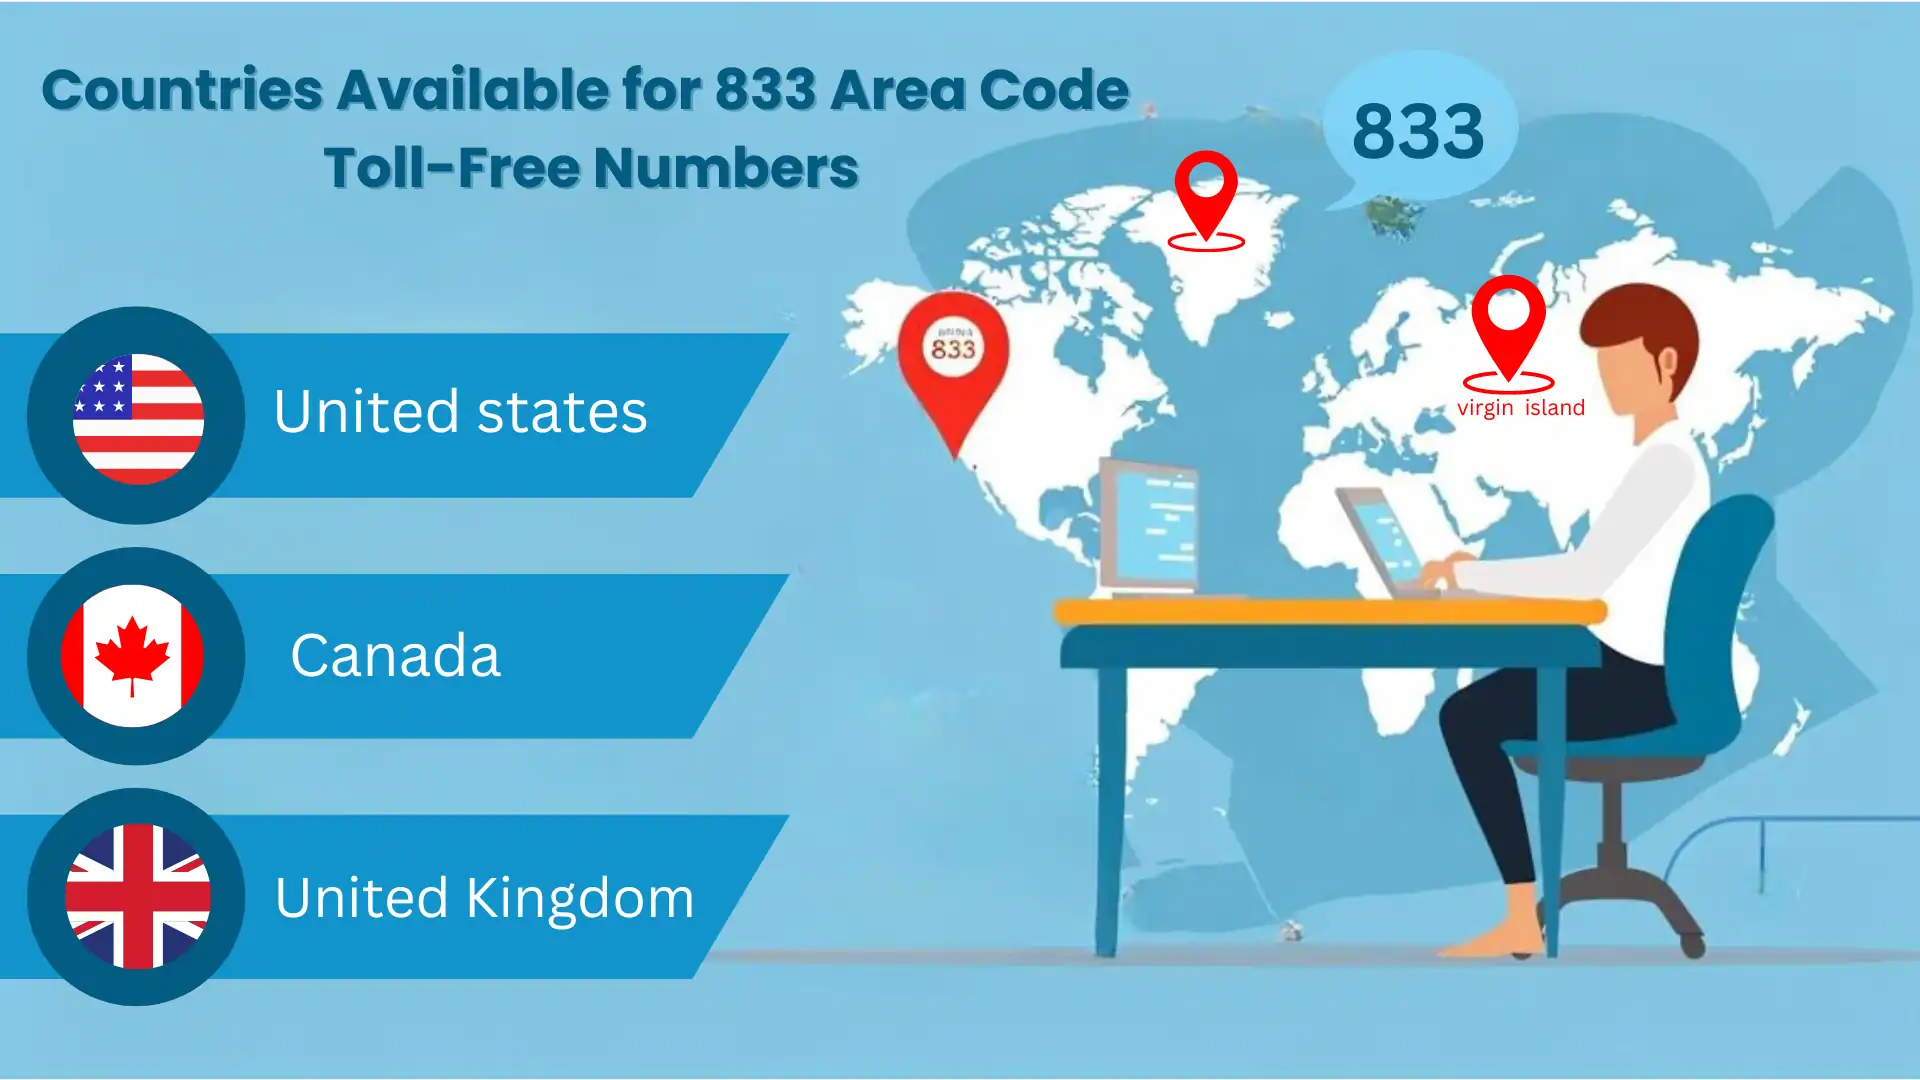 Countries Available for 833 Area Code